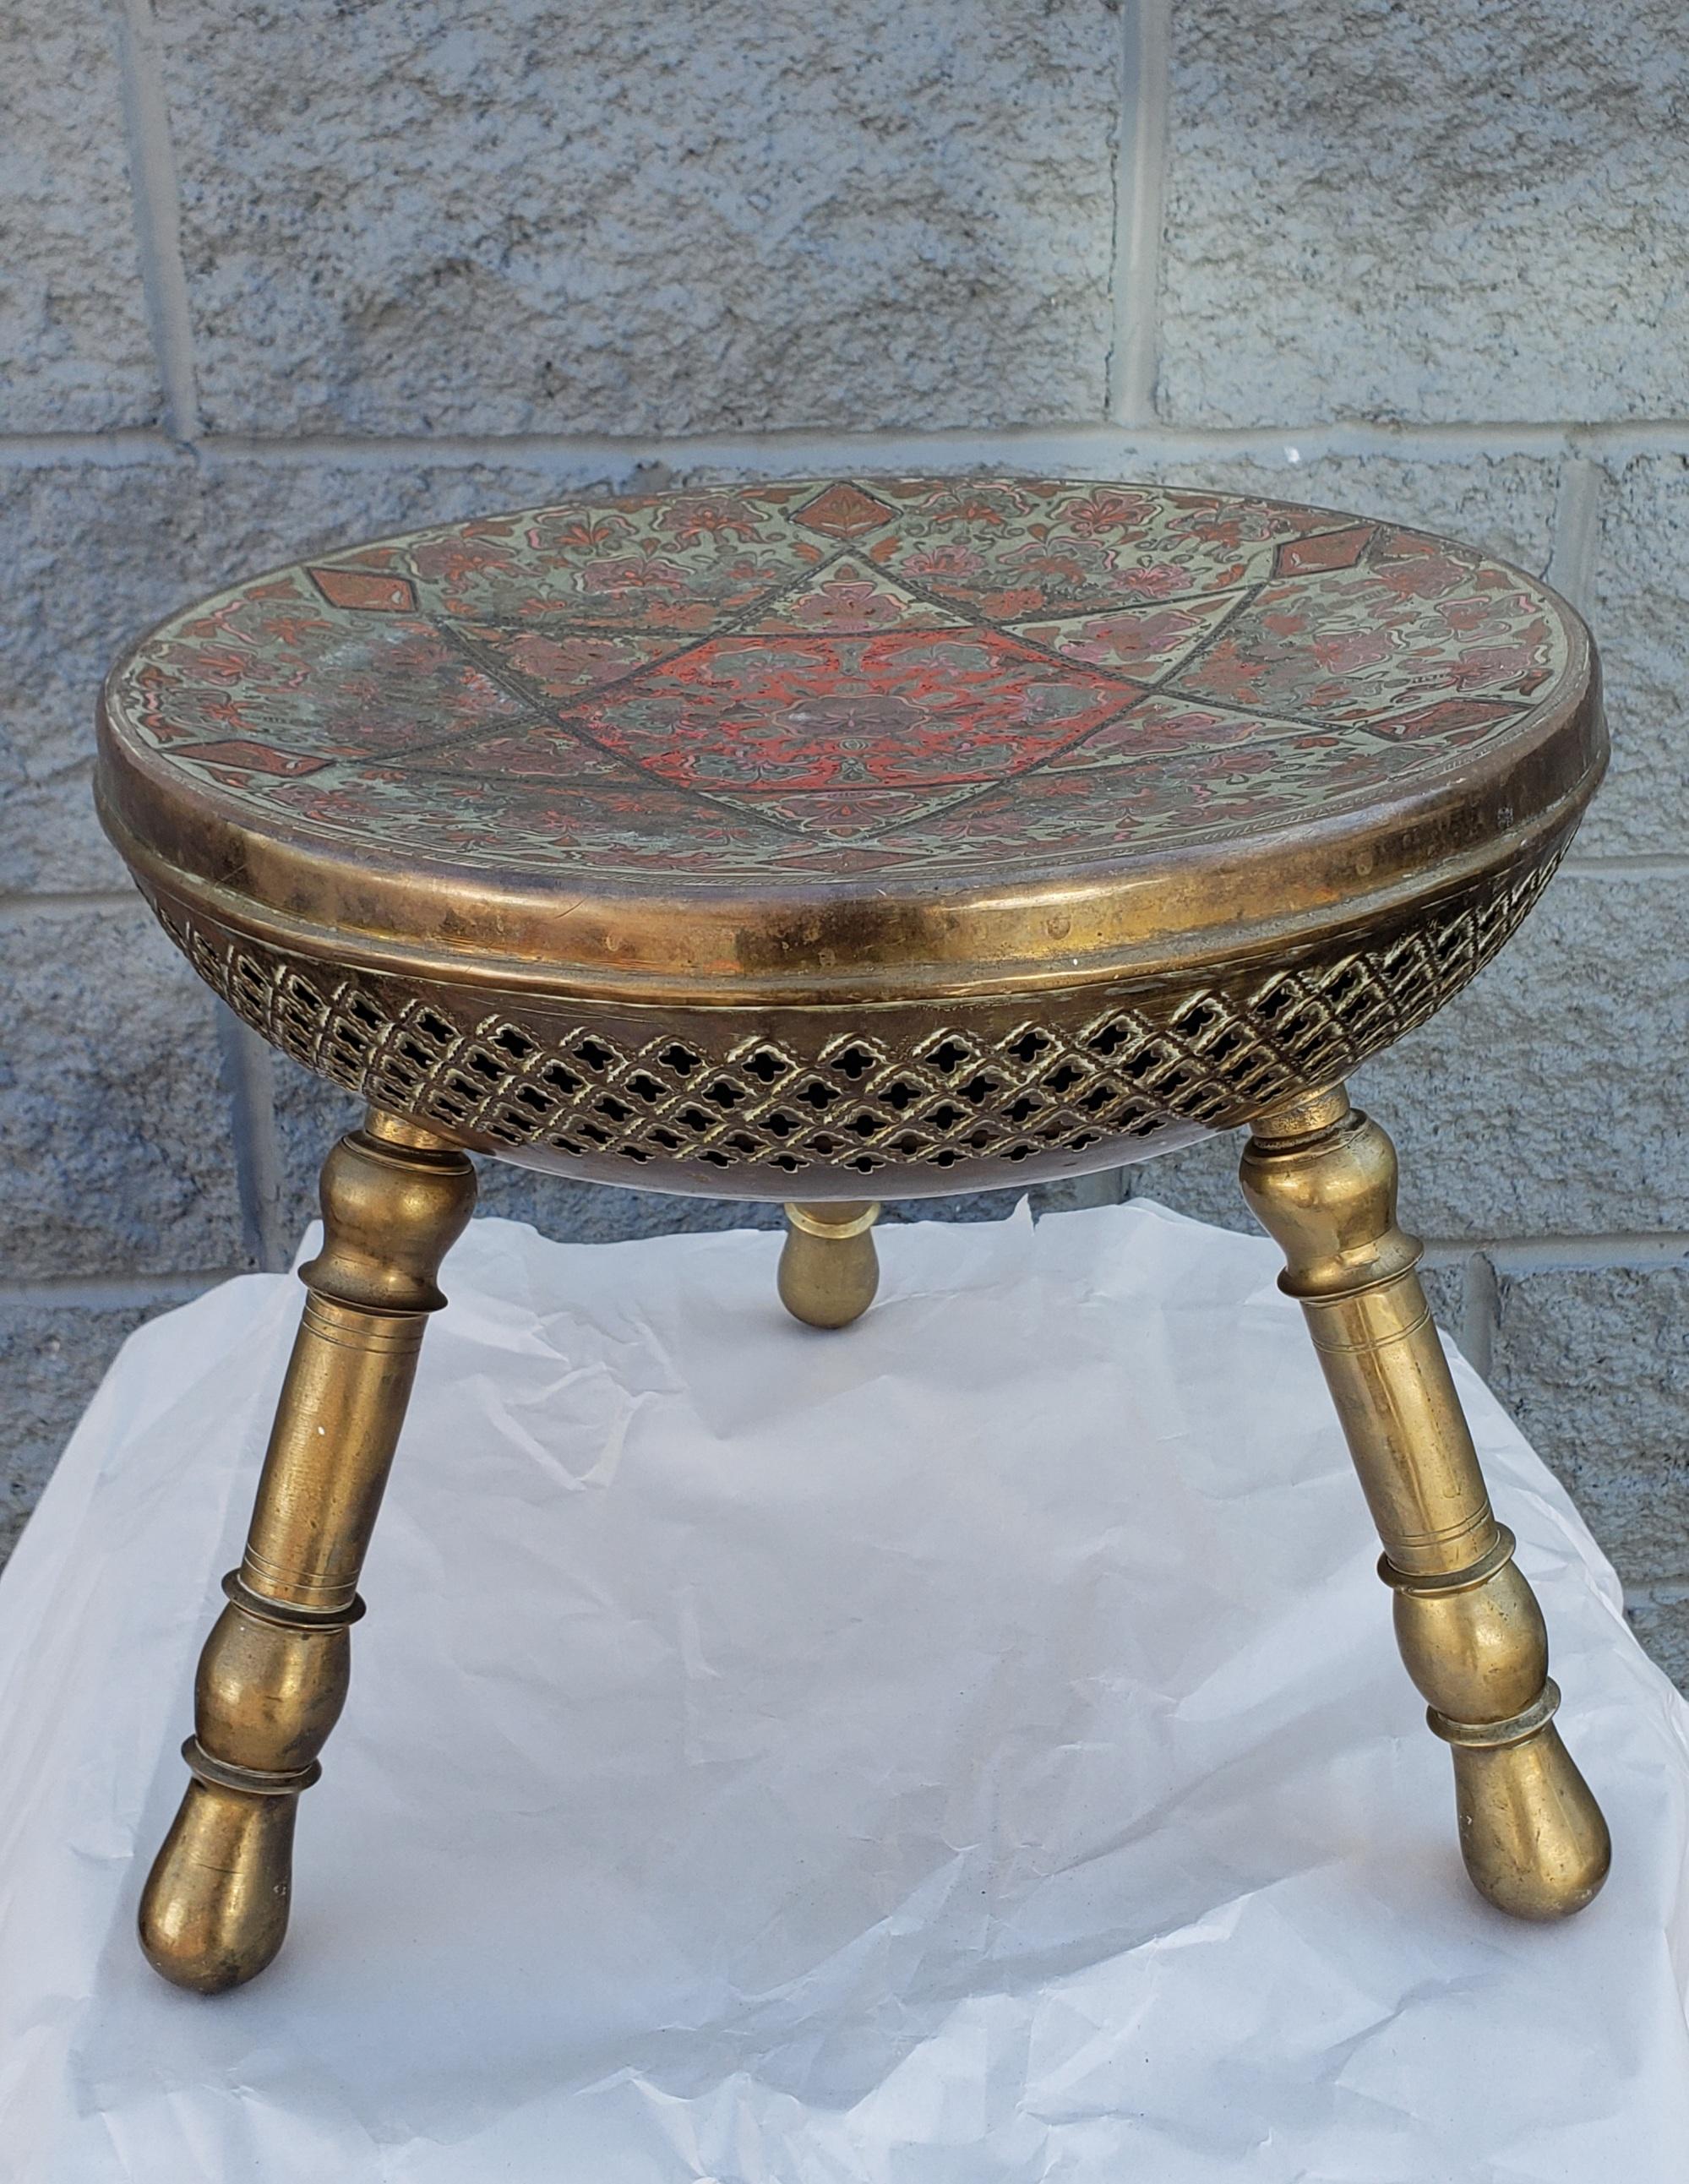 Indian Repoussé & Engraved Brass Bowl / Planter on Engraved Brass Stand / Stool For Sale 6